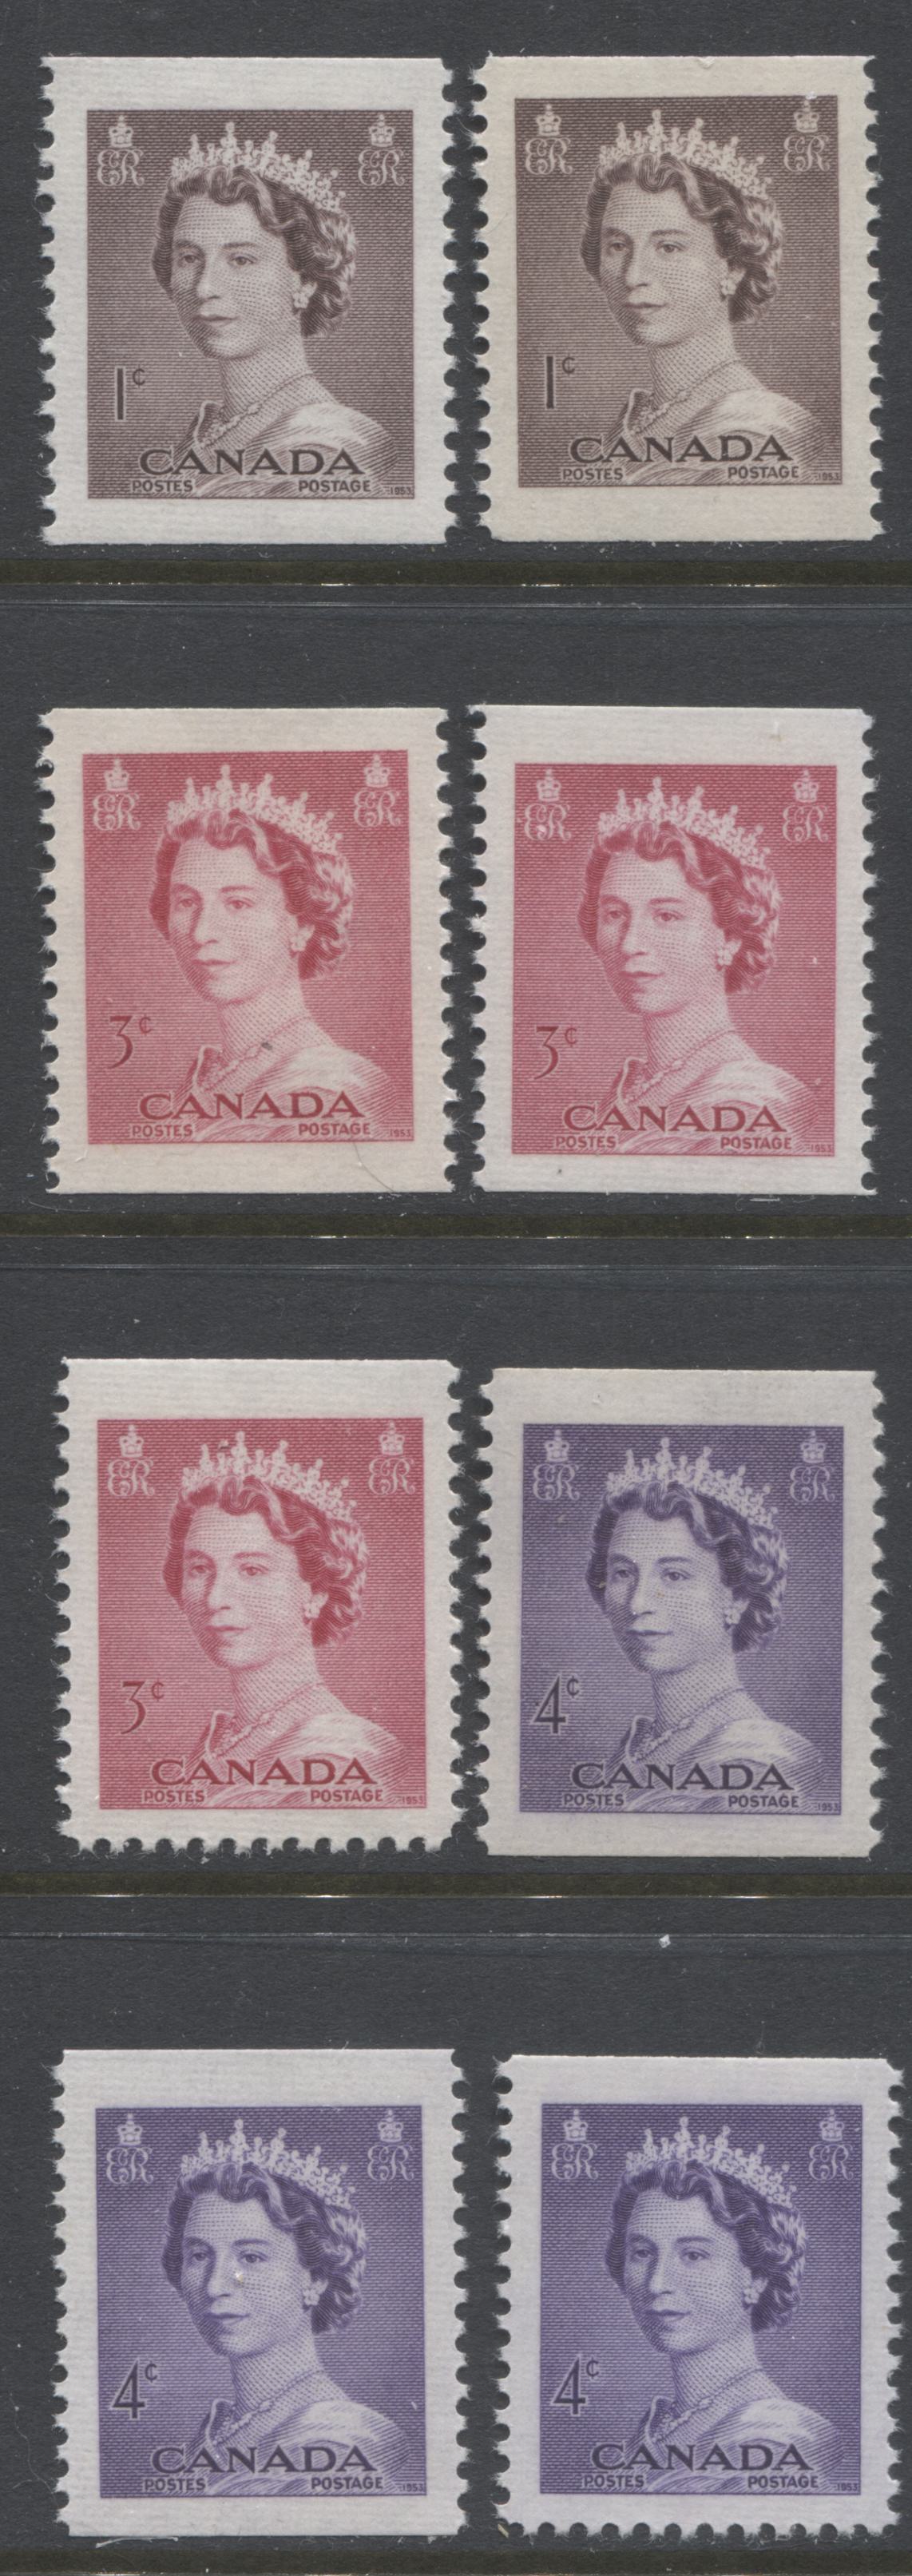 Lot 278 Canada #325as, 327as-bs, 328as-bs 1c, 3c, 4c Violet Brown, Cerise & Violet Queen Elizabeth II, 1953-1954 Karsh Issue, 8 VFNH Booklet Singles, From Centre Of Booklet Rows, Different Shades